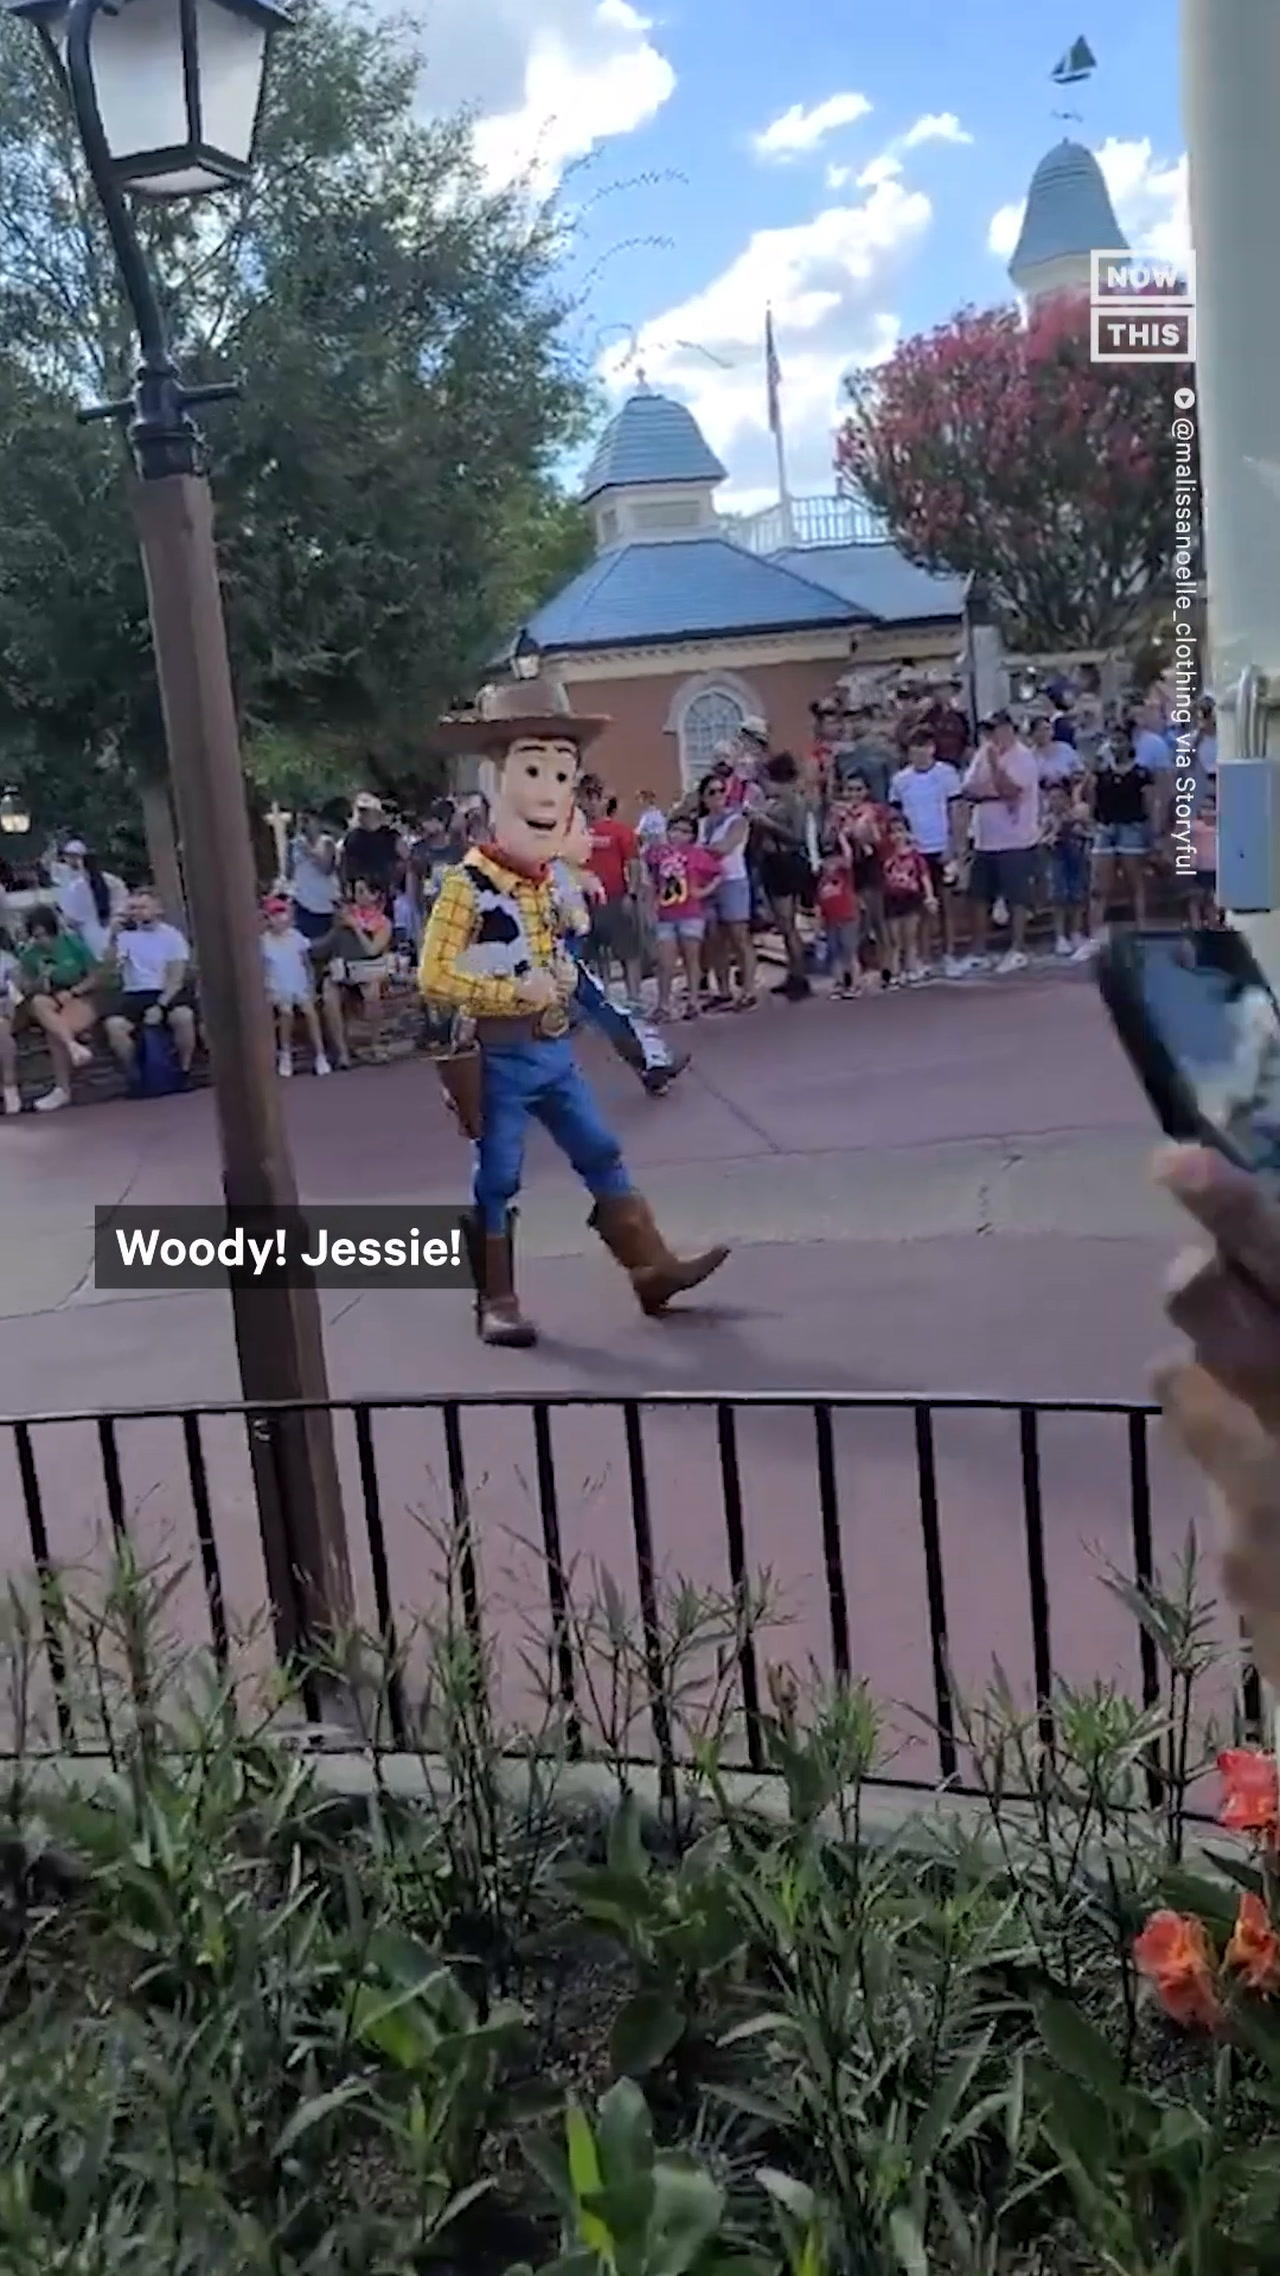 Woody Helps Jessie Create Magical Moment for Child at Disney World